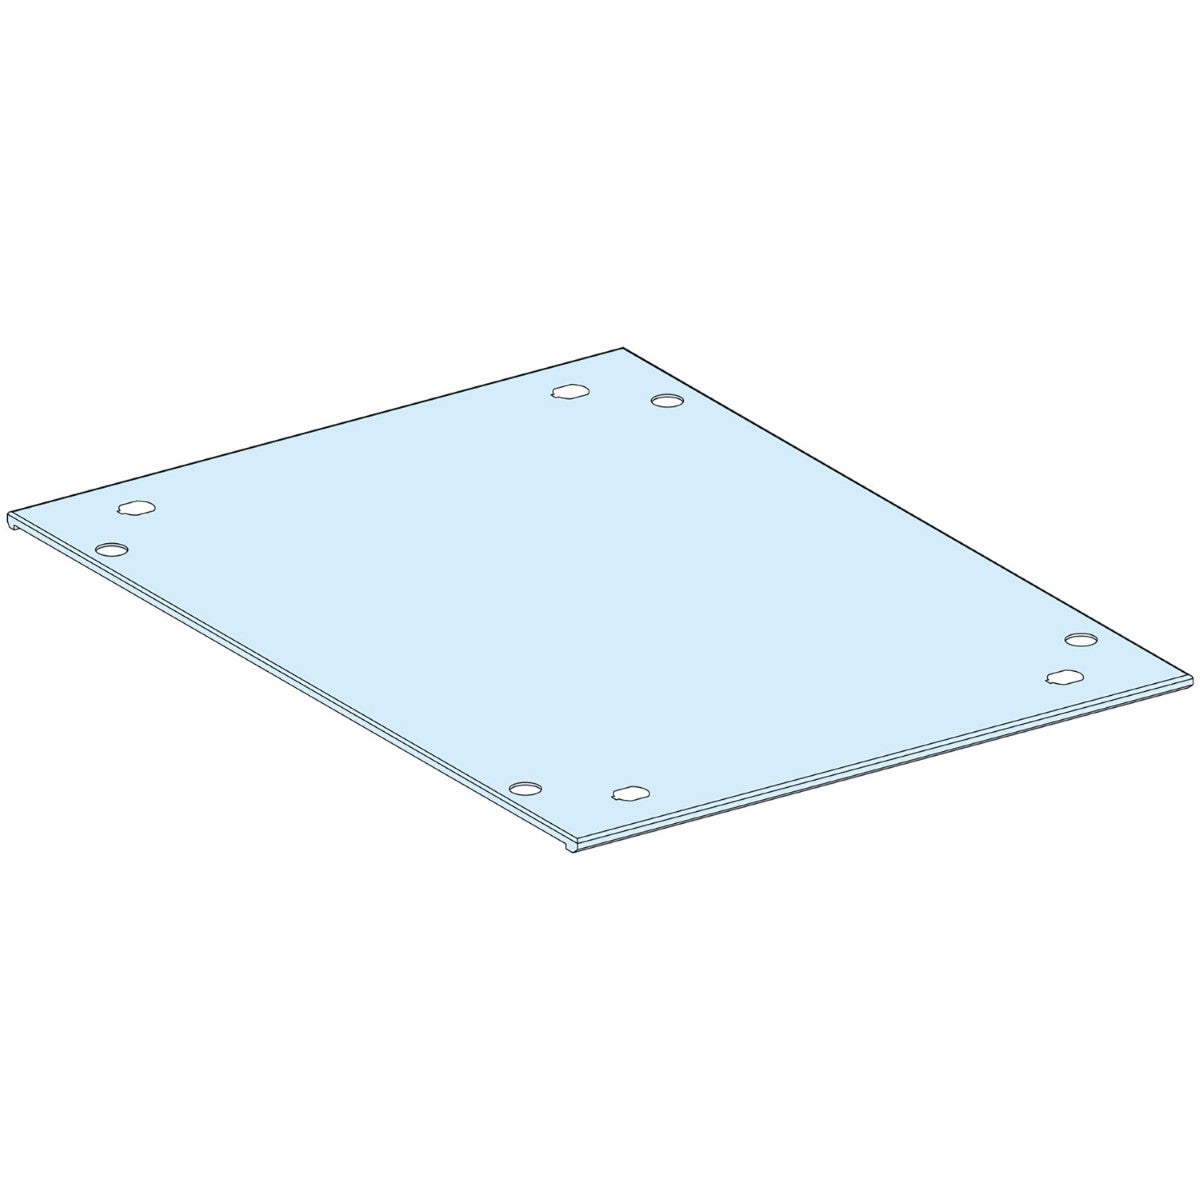 Roof plate, PrismaSeT P, for enclosure, W300mm, D600mm, IP55, white, RAL 9003